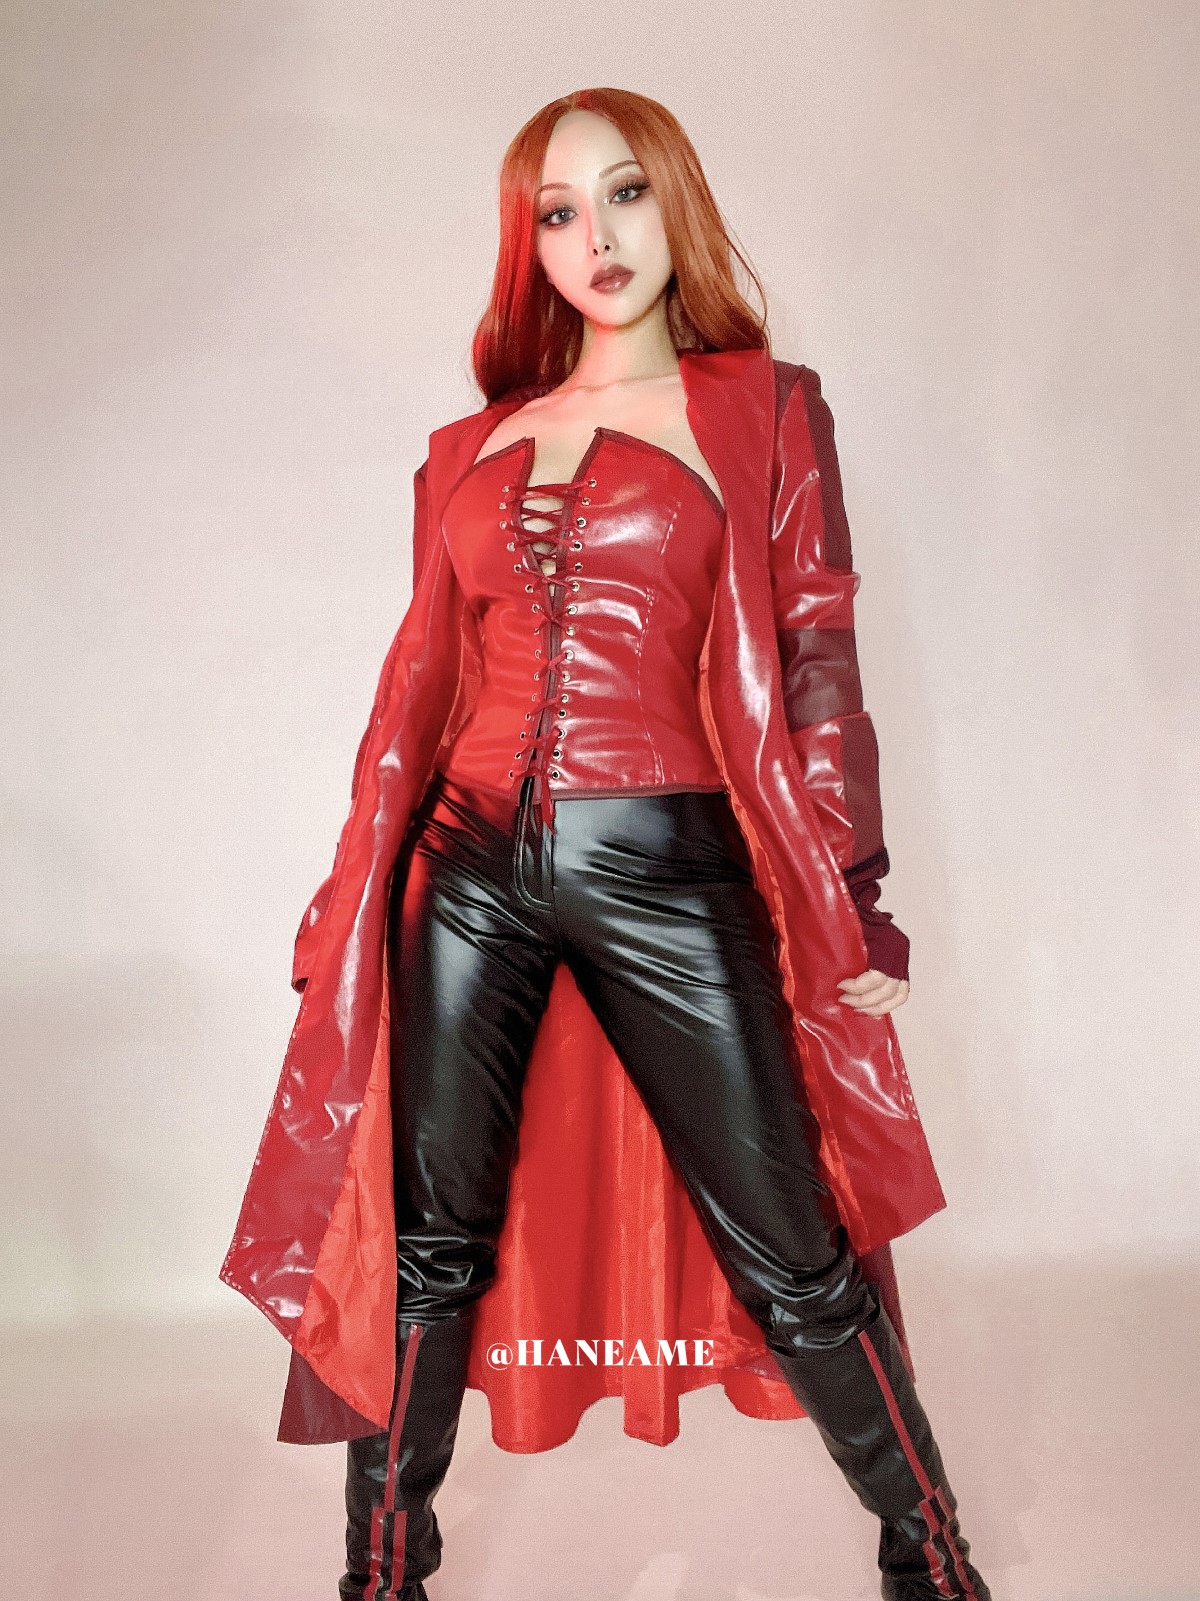 Coser@HaneAme Scarlet Witch 0040 8543959217.jpg